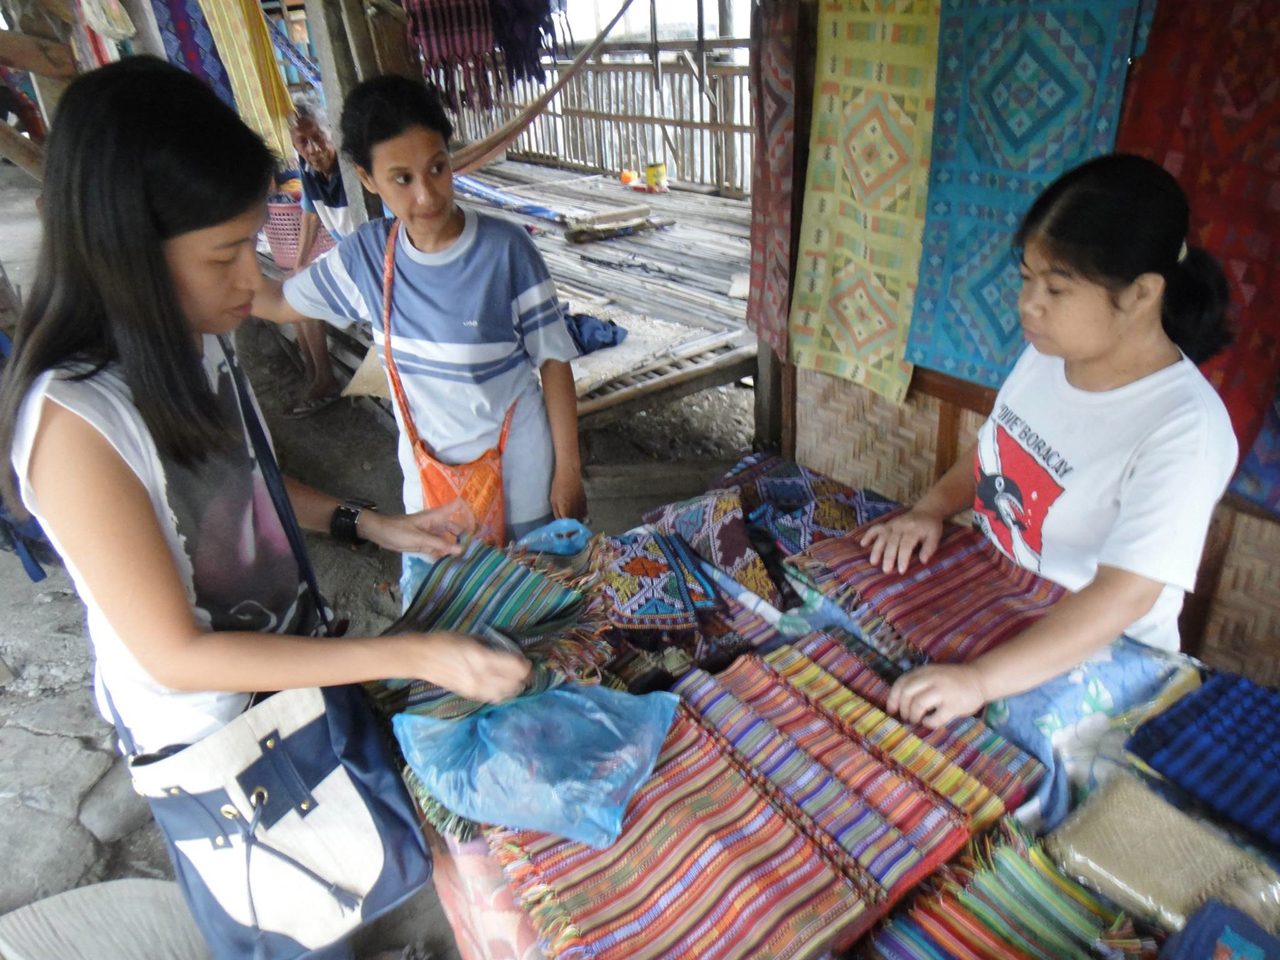 ENCOURAGEMENT. To encourage and retain the weavers who partner with Vesti, Rodriguez shows them bags made out of their textiles. Doing so gives them a sense of pride and belonging.   